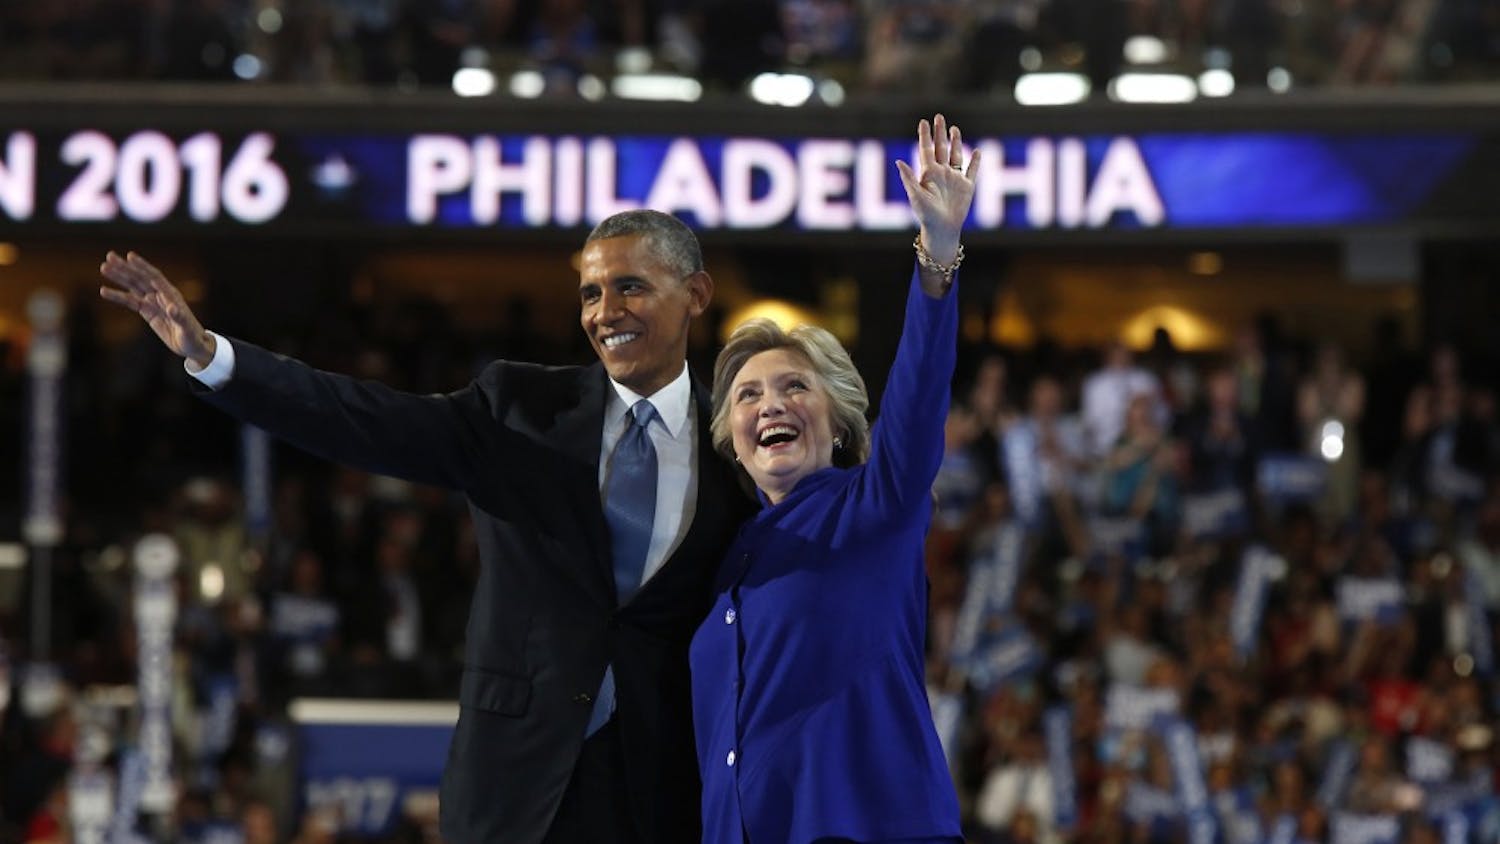 President Obama and Democratic presidential nominee Hillary Clinton on stage during the third day of the Democratic National Convention at the Wells Fargo Center in Philadelphia on Wednesday, July 27, 2016. (Carolyn Cole/Los Angeles Times/TNS)